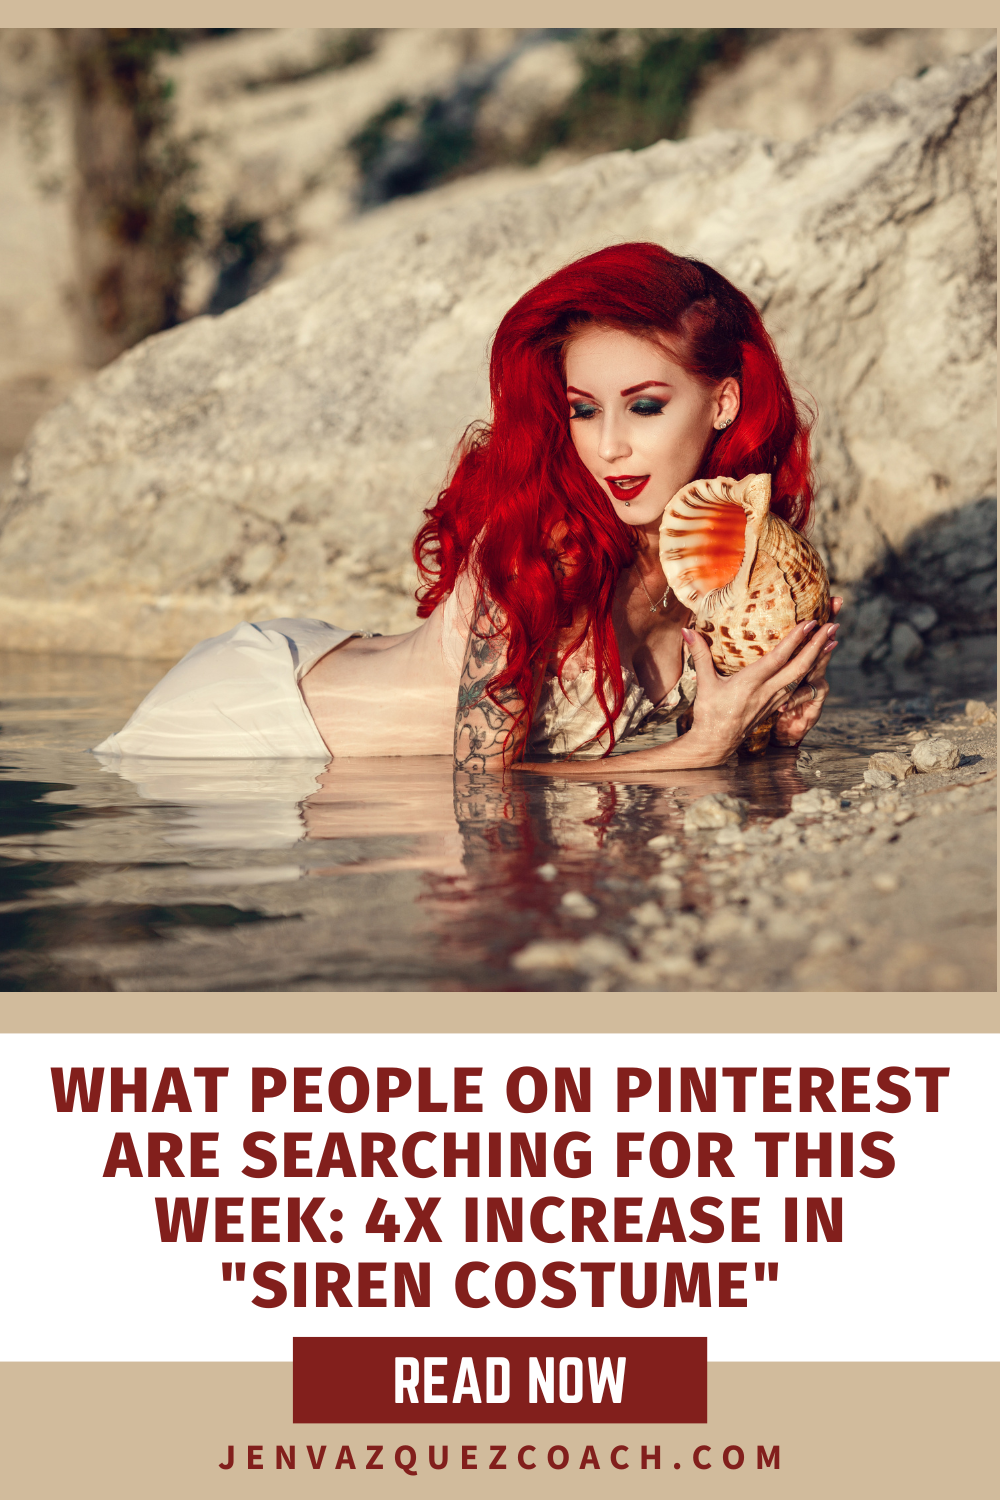 What people on Pinterest are searching for this week: Spooky Season Jen Vazquez Media